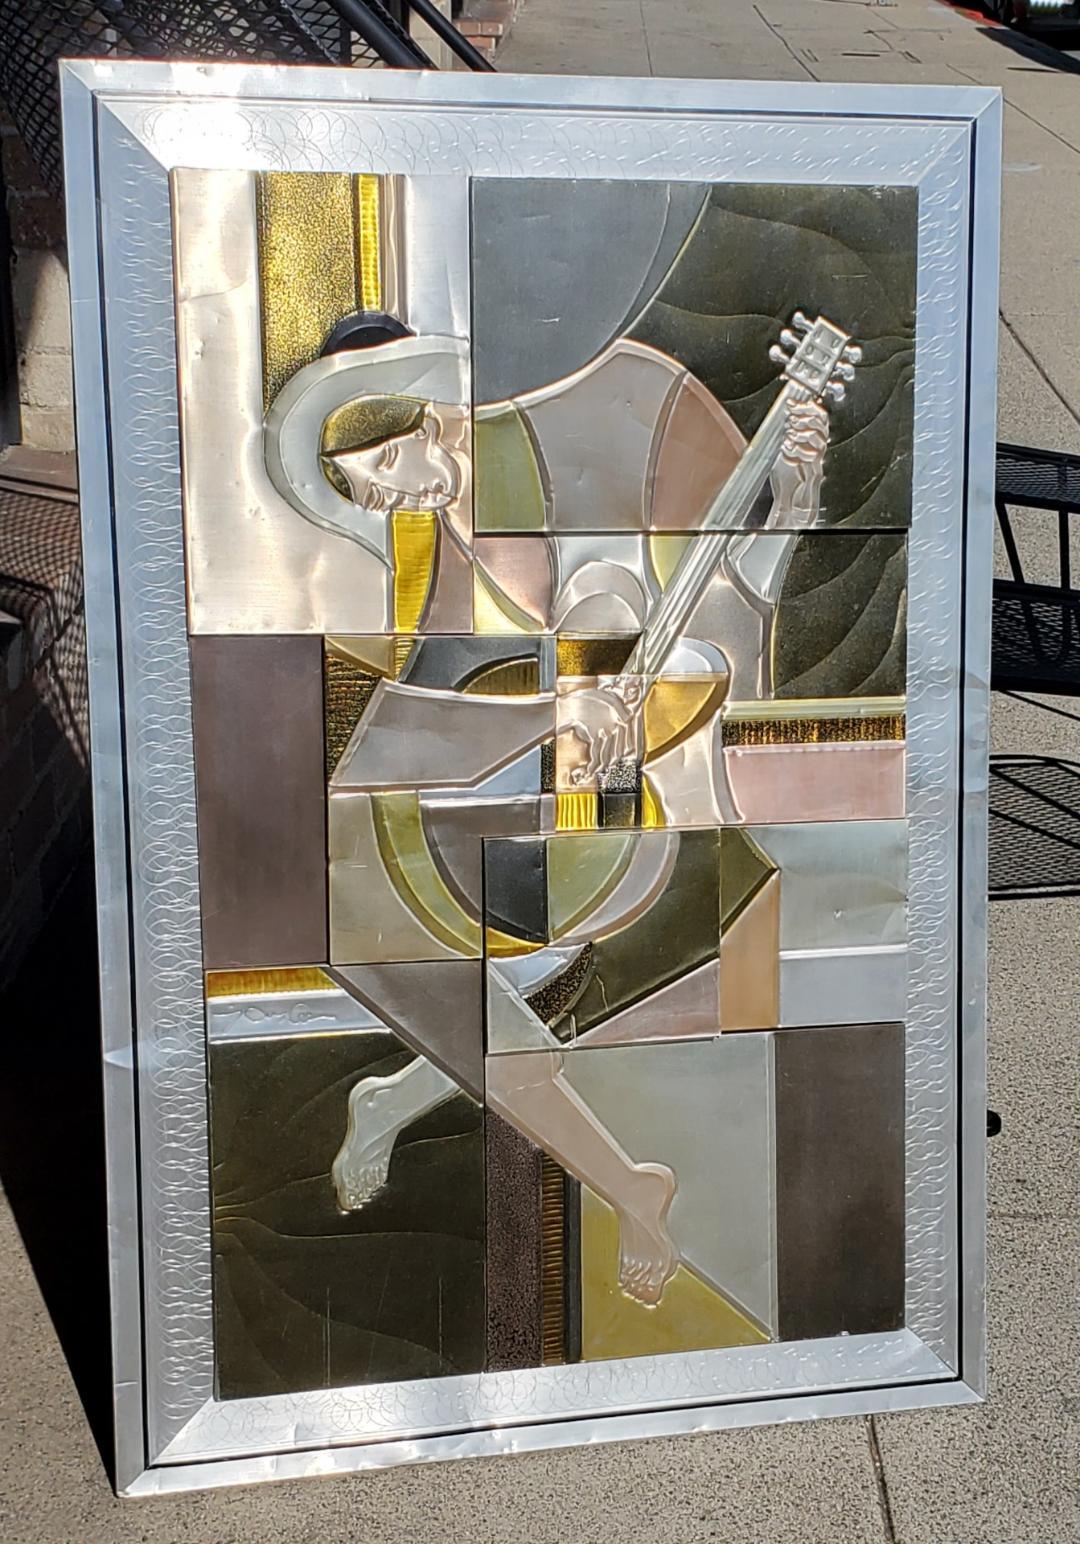 Picasso's Guitarist is rendered in a 3D embossed tinted aluminum metal sculpted Art Piece, Signed by Artist.

Picasso's 